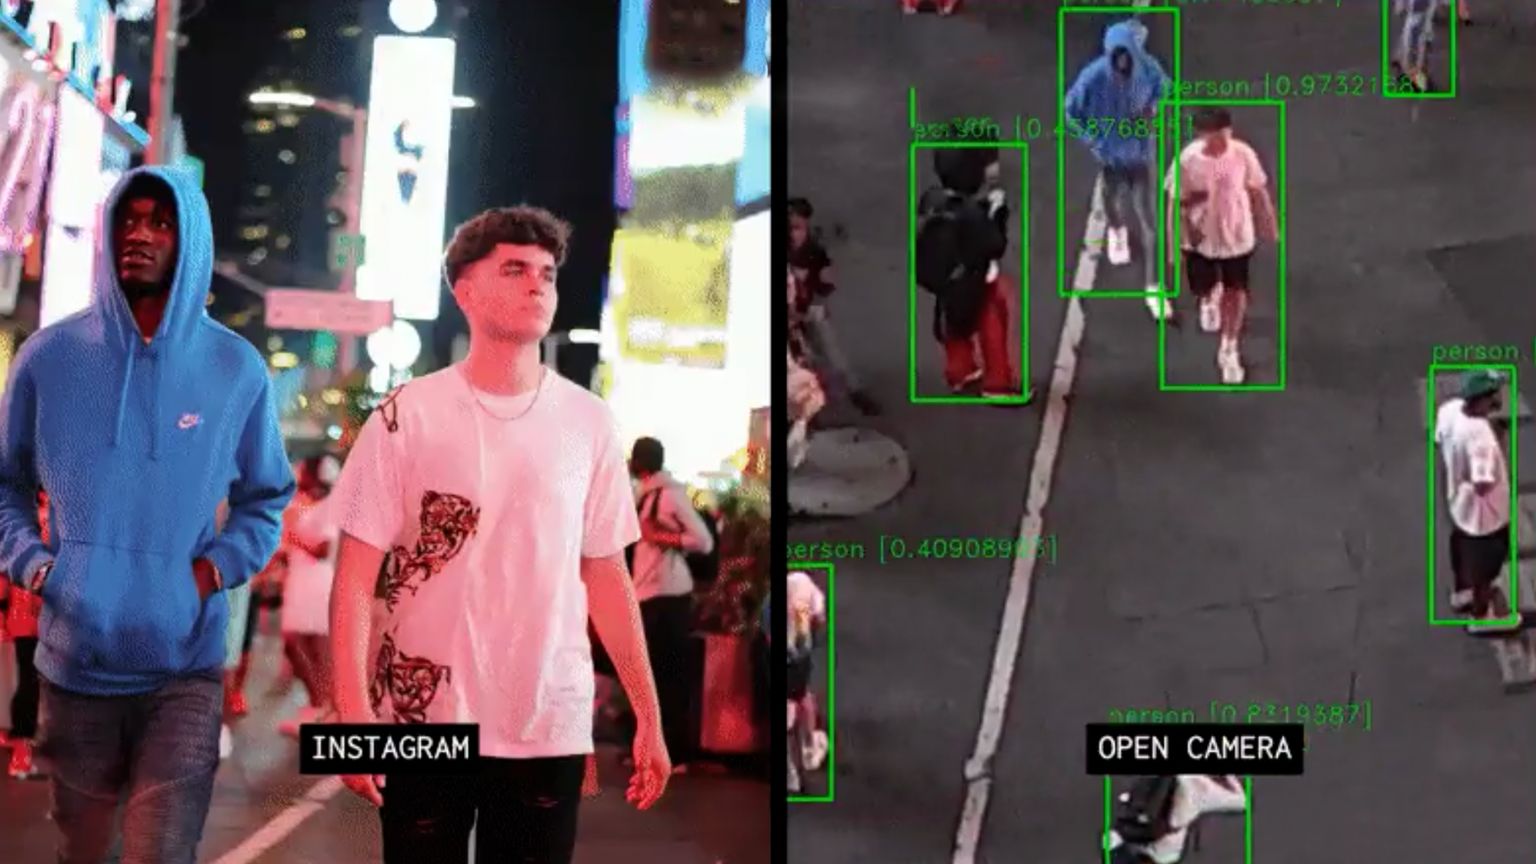 The algorithm that tracks your location through CCTV by analyzing images you post online